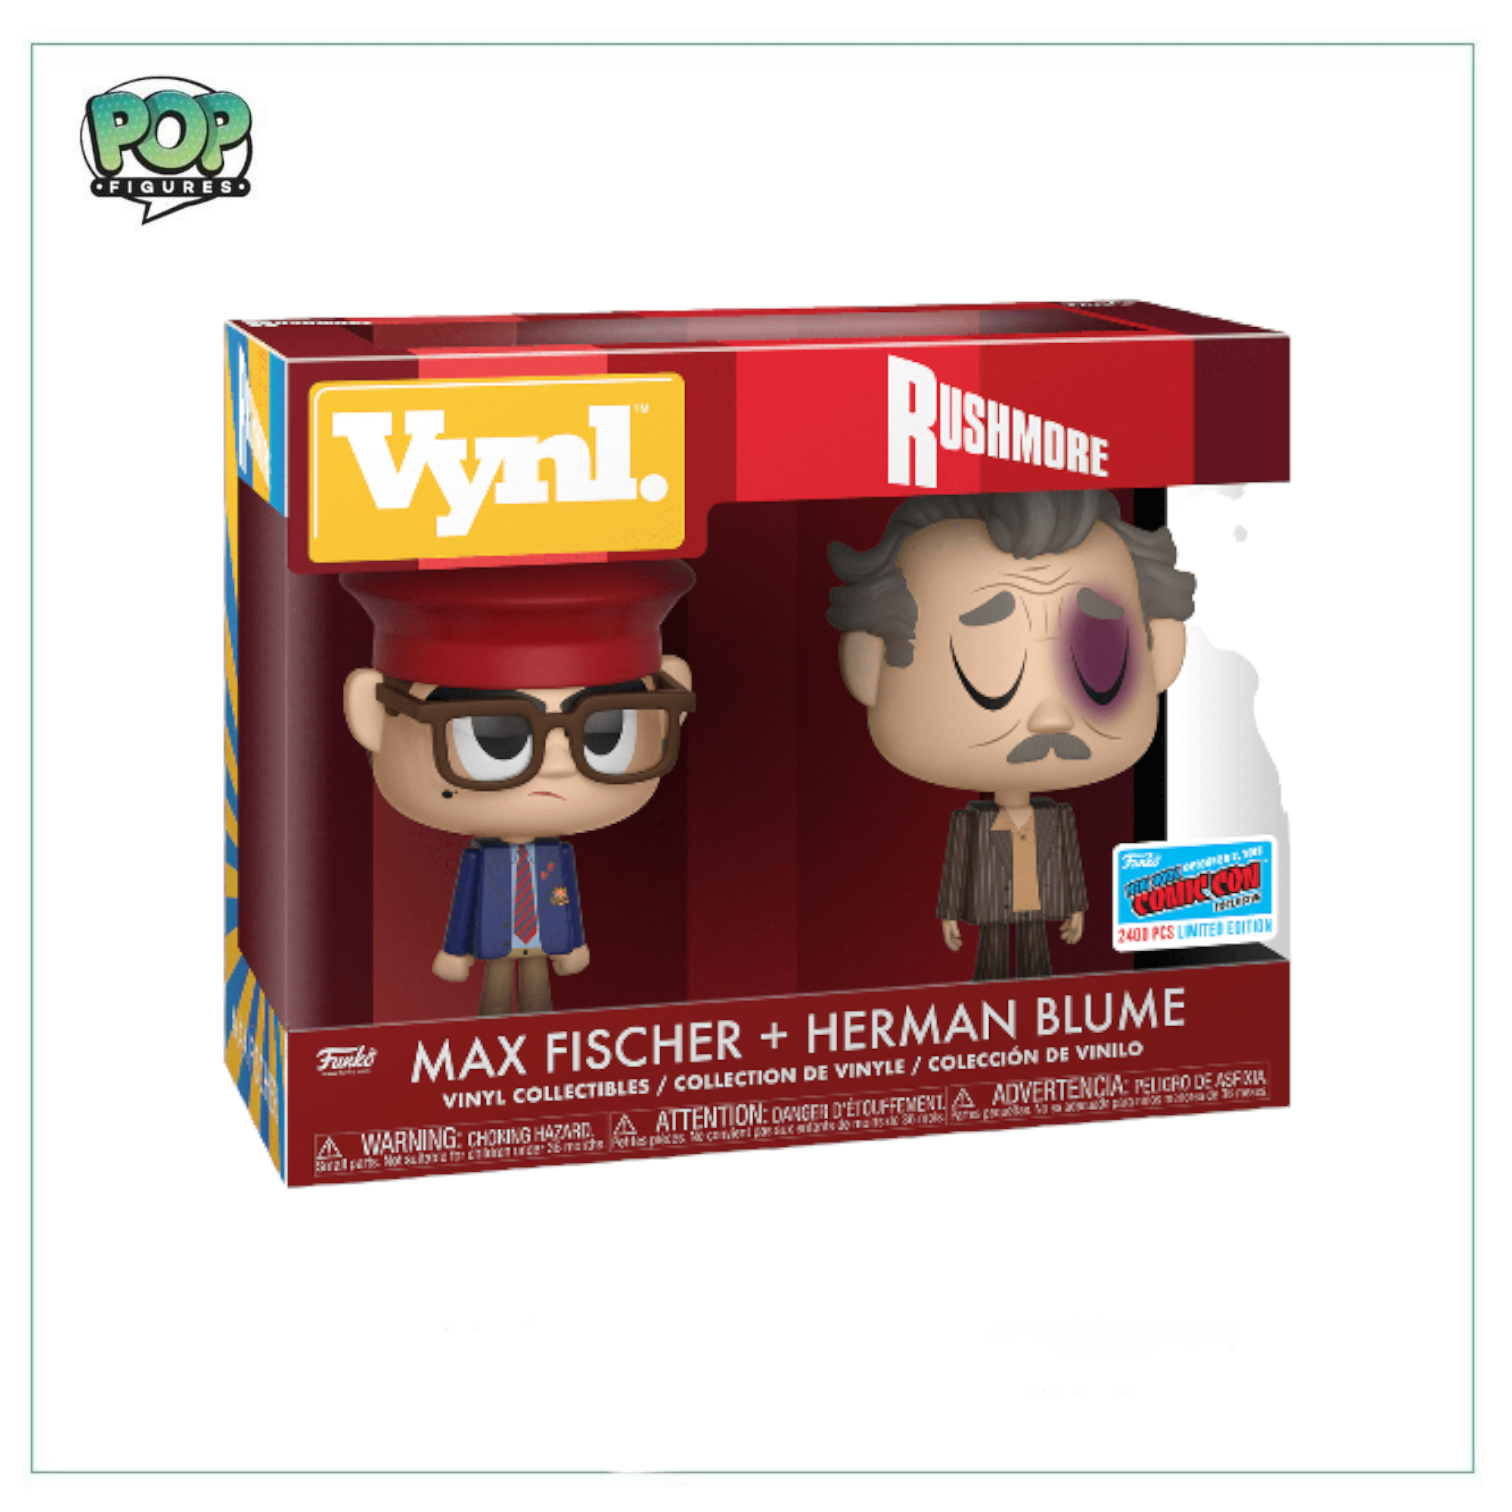 Max Fischer & Herman Blume 2 Pack Deluxe Vinyl! Rushmore, 2018 NYCC, 2,400pcs Limited Edition - Angry Cat